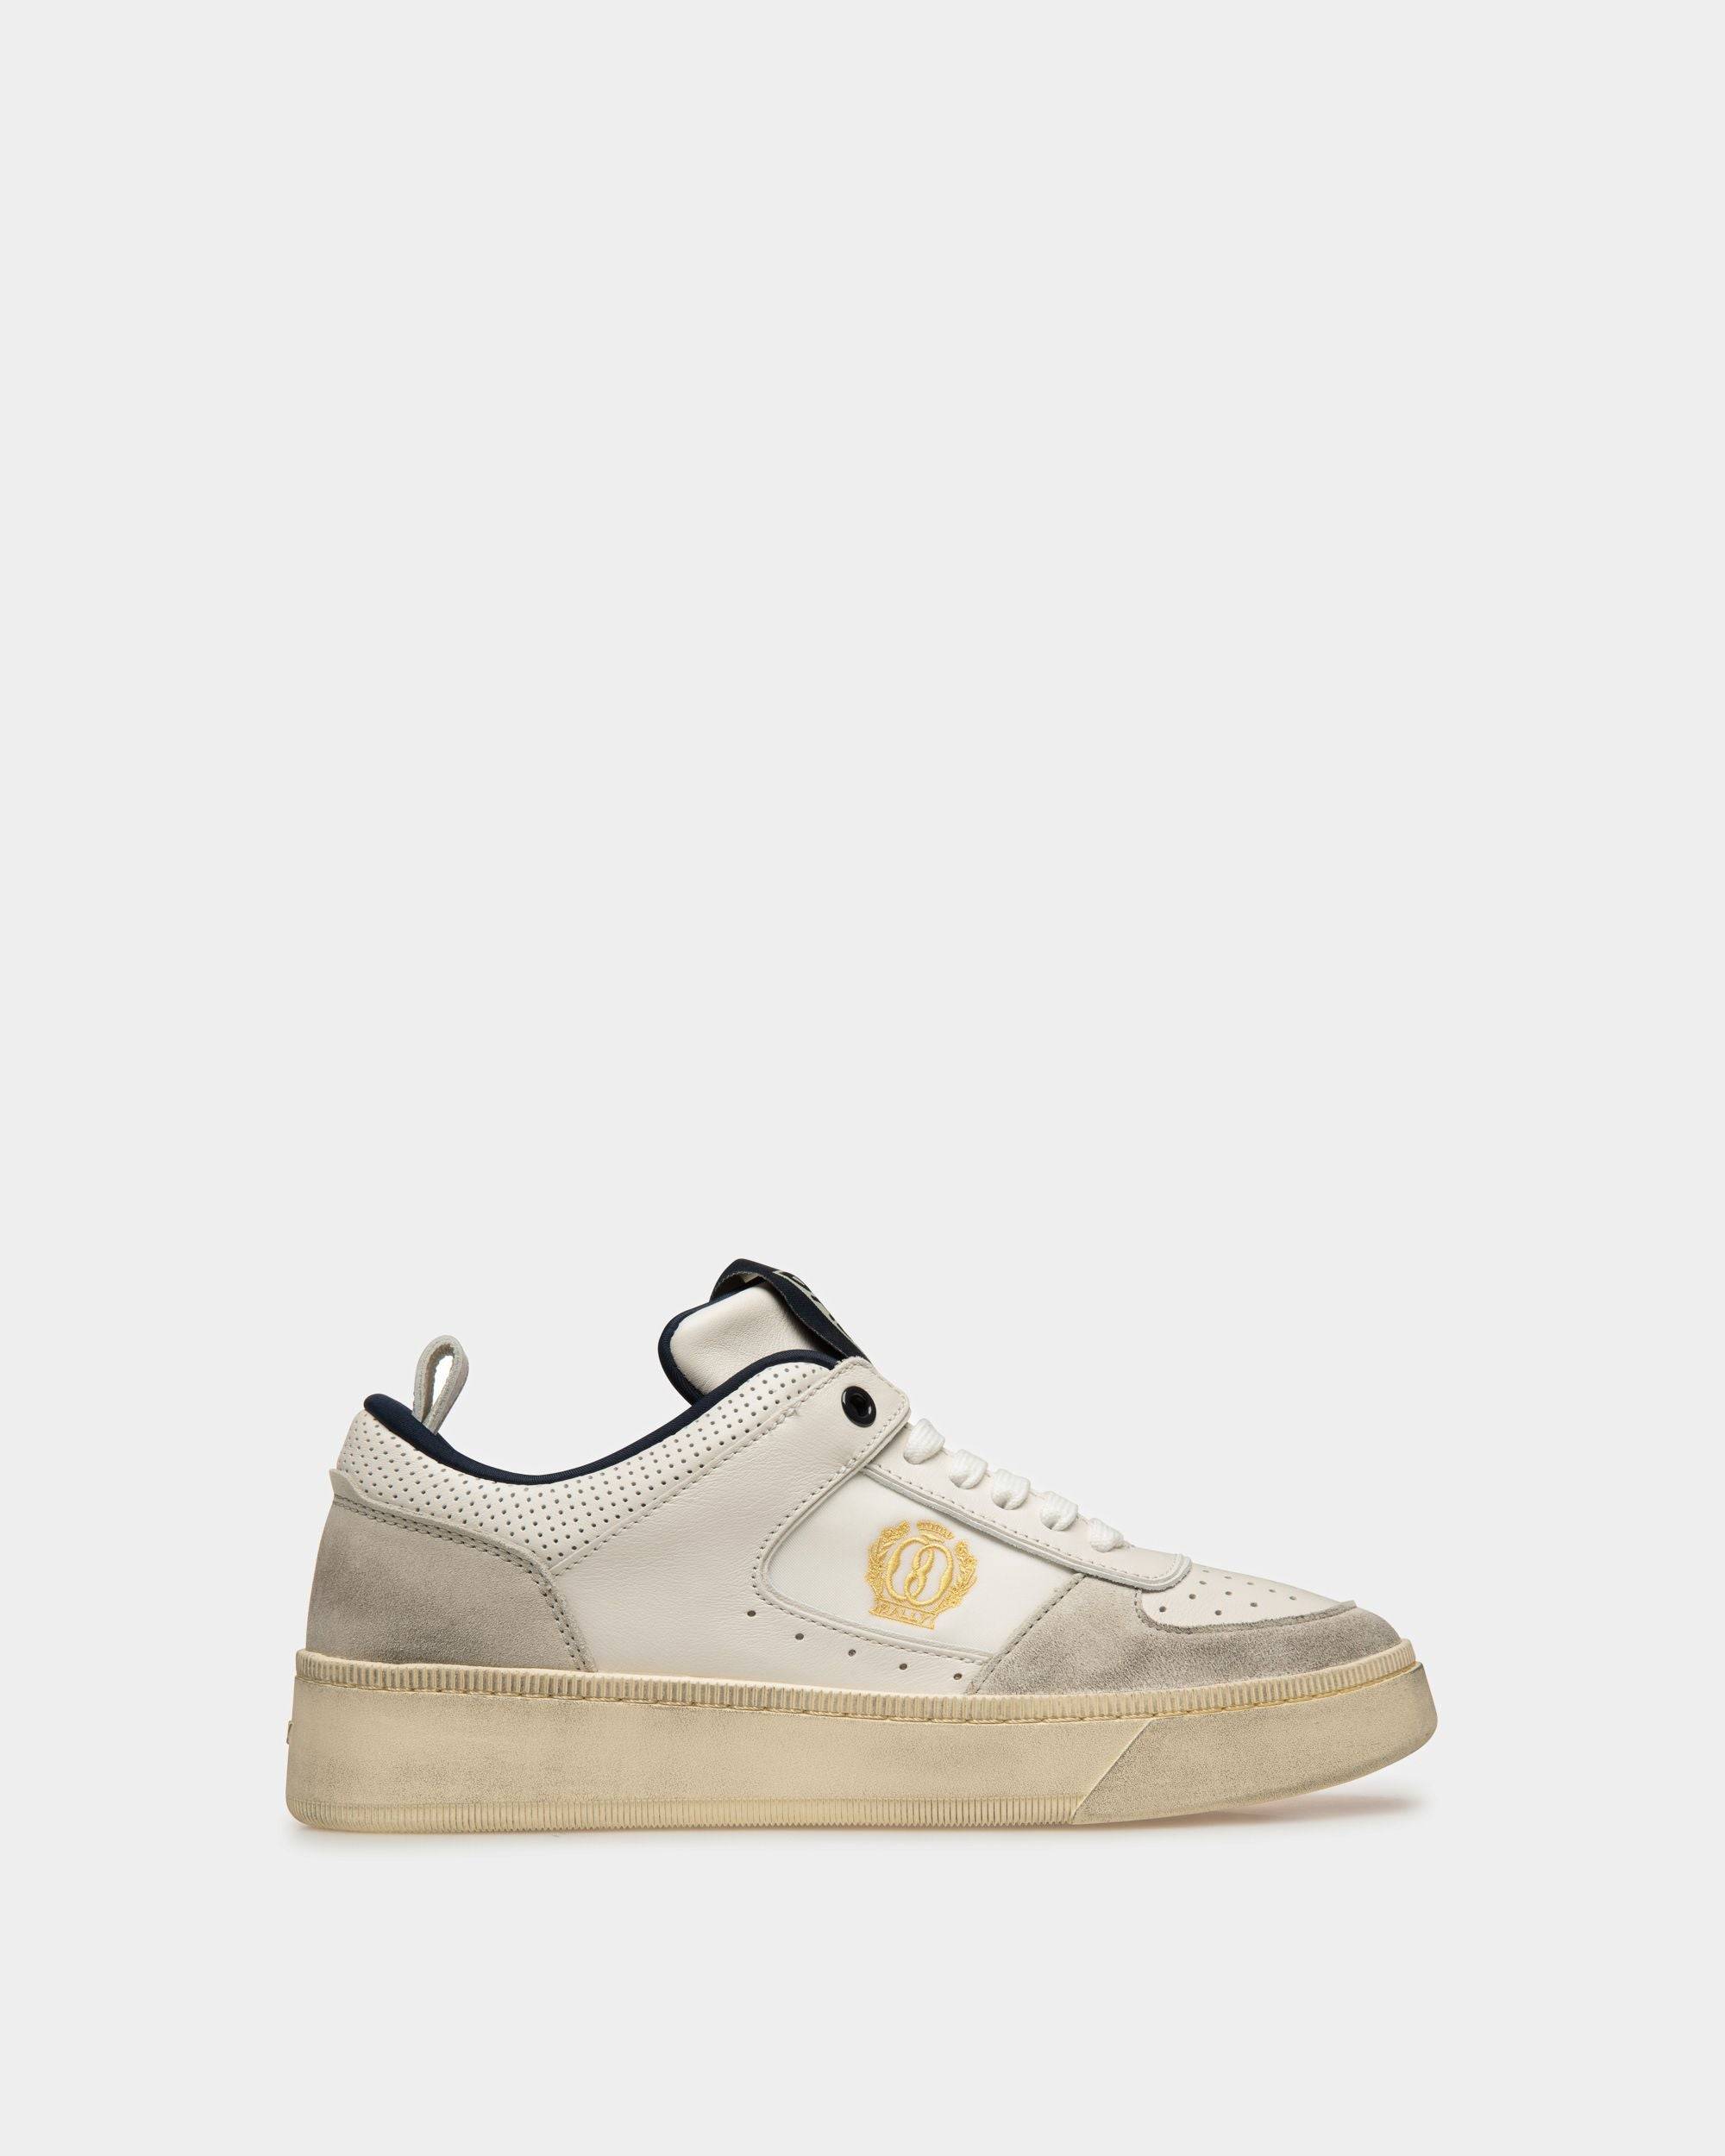 Riweira | Women's Sneakers | Dusty White And Midnight Leather | Bally | Still Life Side